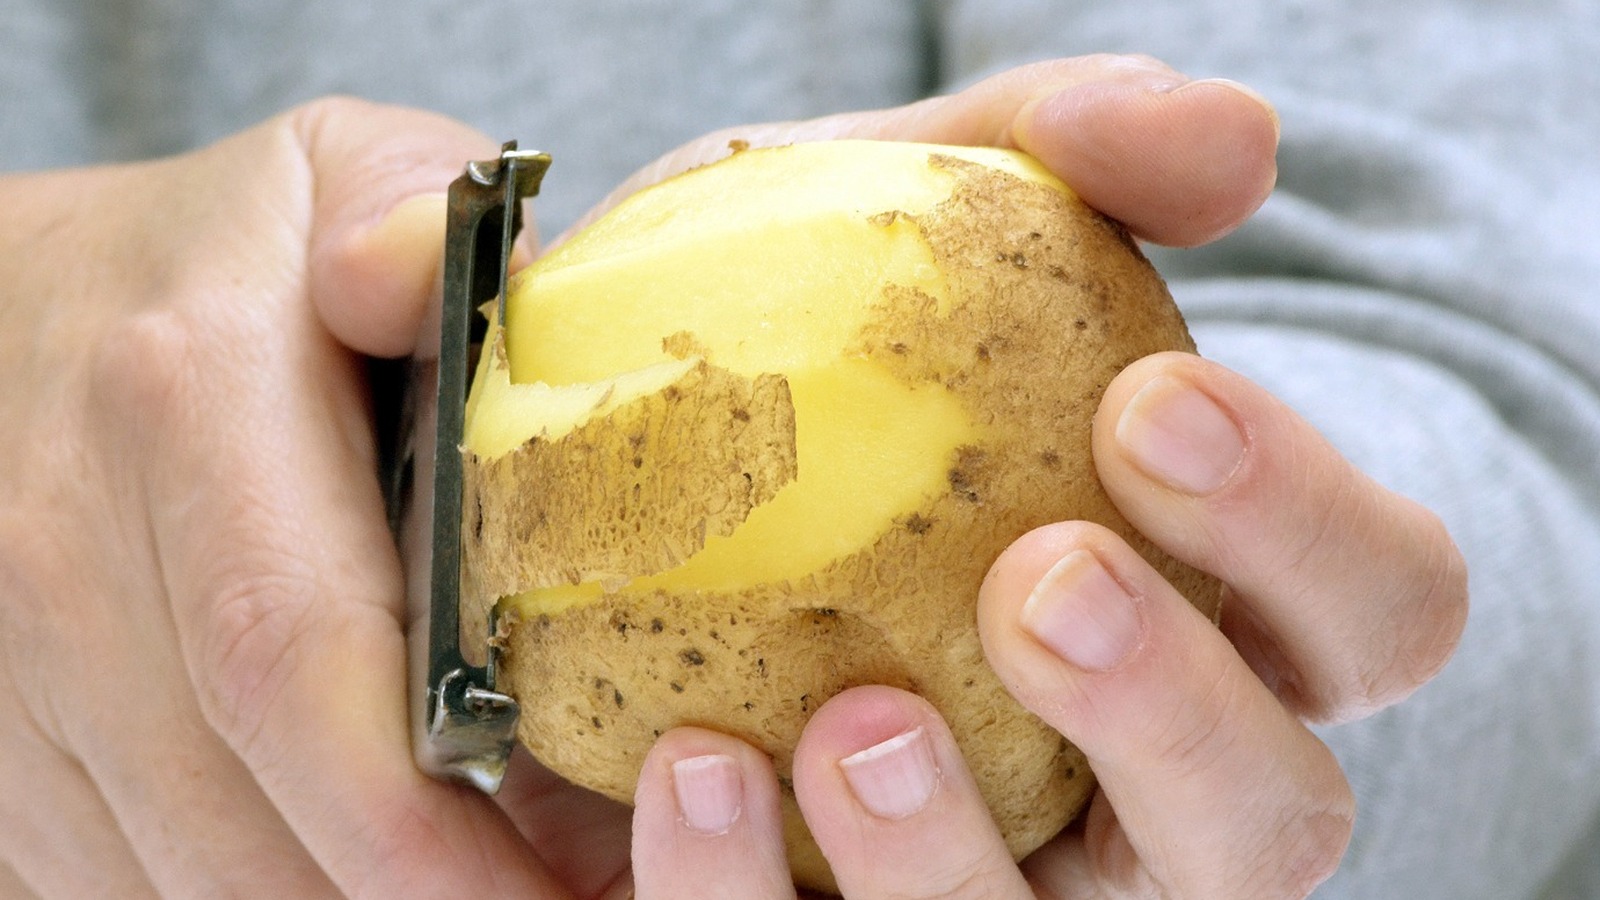 https://www.mashed.com/img/gallery/the-best-way-to-peel-a-potato-if-you-dont-have-a-peeler/l-intro-1681398711.jpg